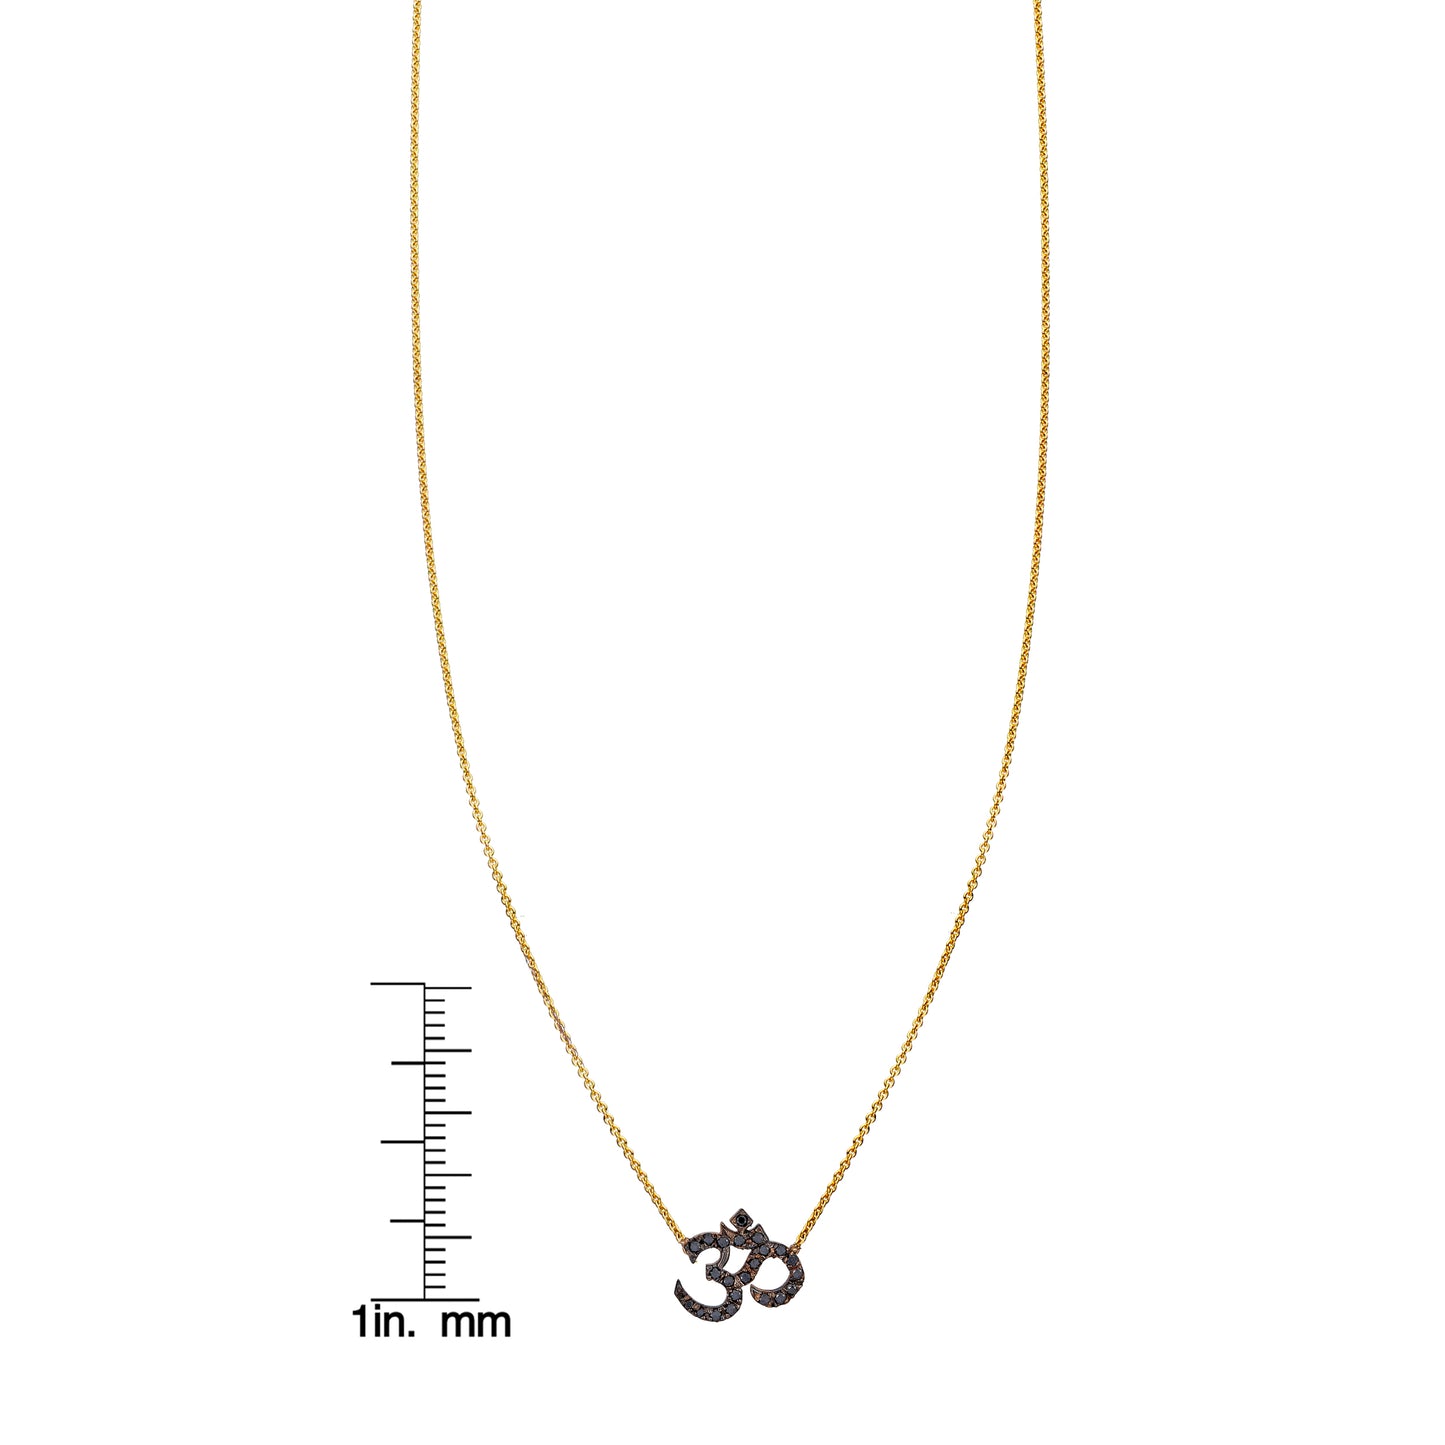 black diamond gold ohm necklace with ruler